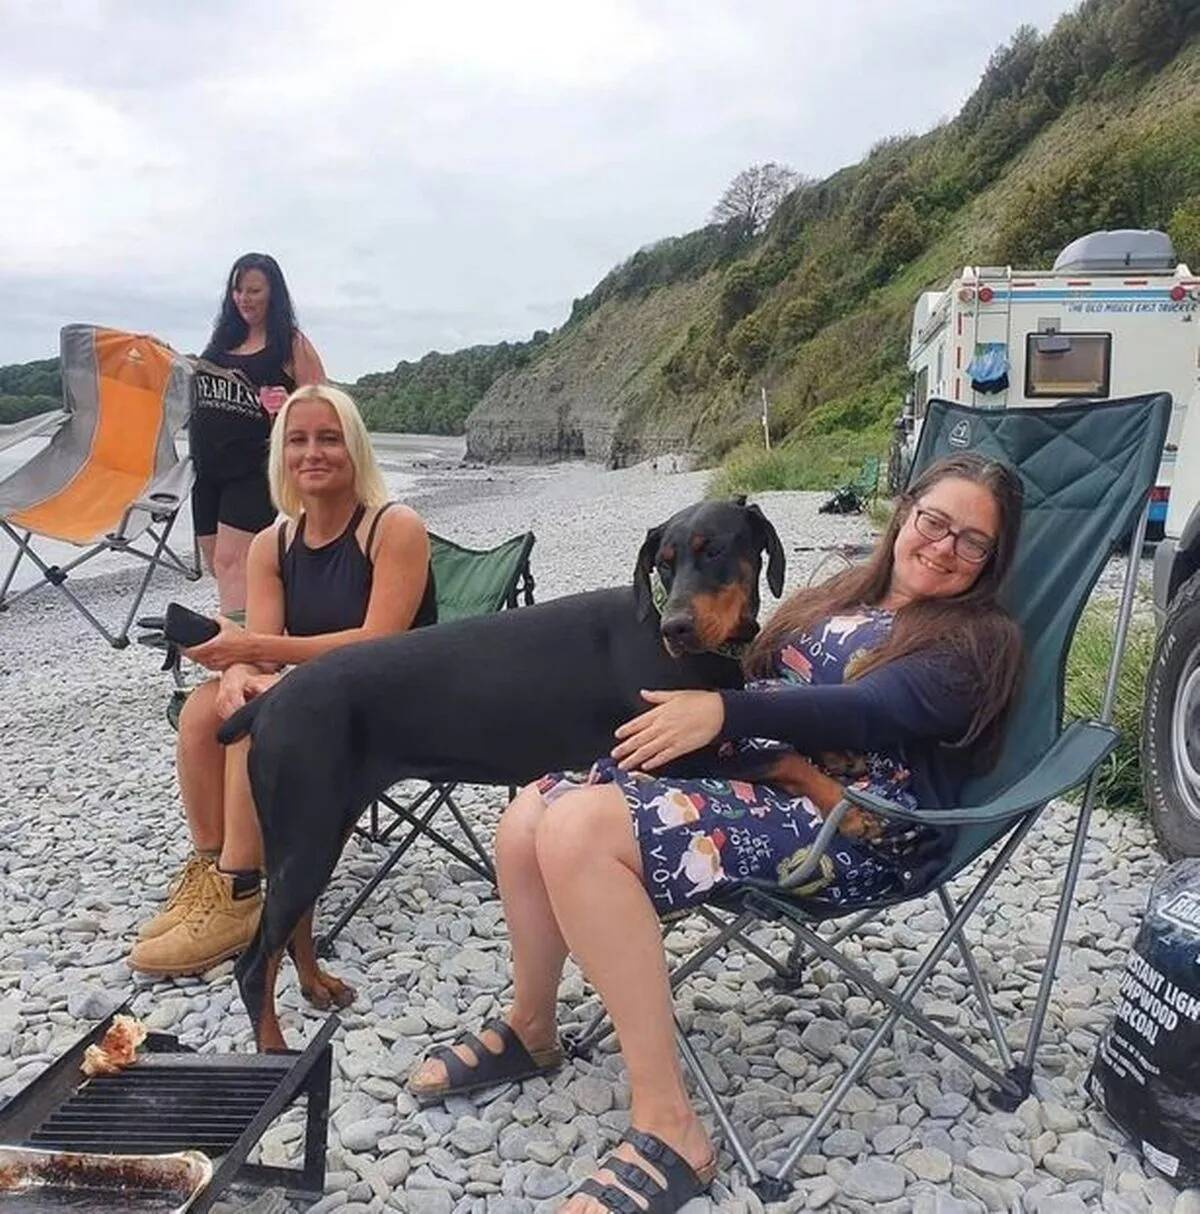 Lucy and Katie sitting in foldout chairs on the beach, Indie the doberman half in Lucy's lap.